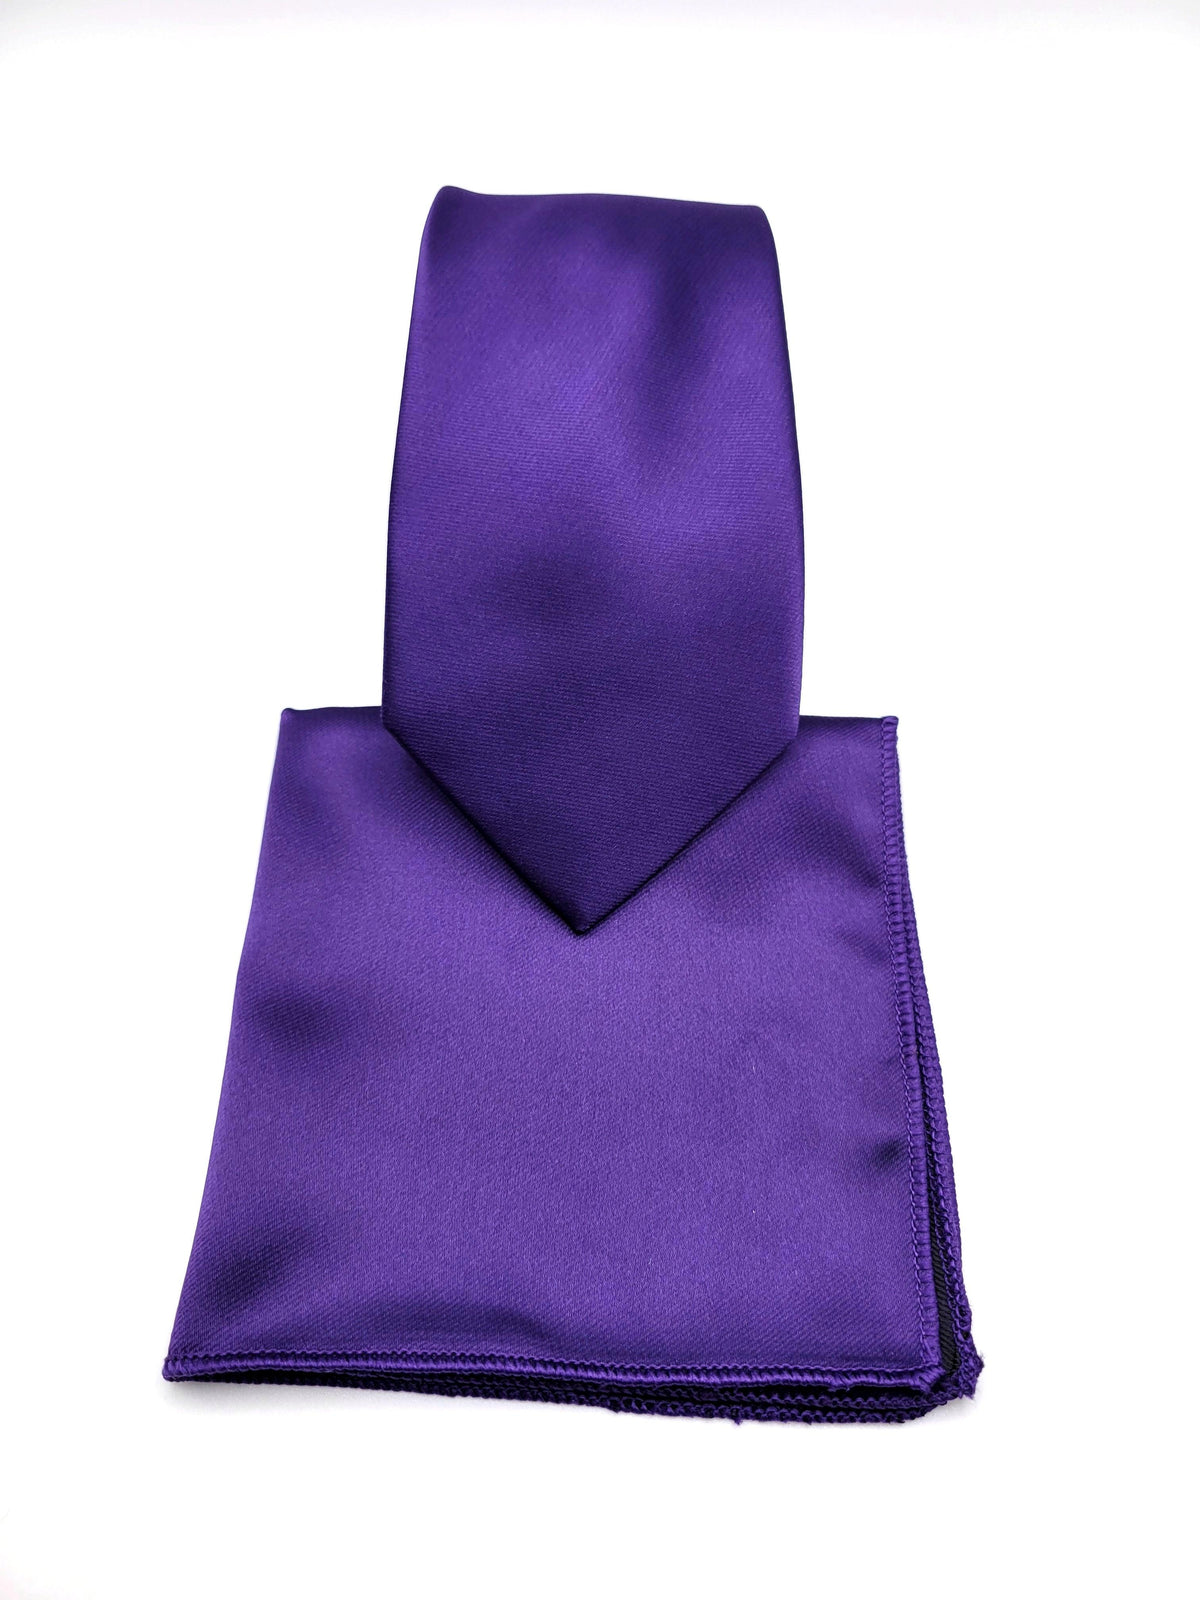 Royal Purple Necktie and Pocket Square - The Upscale Banker